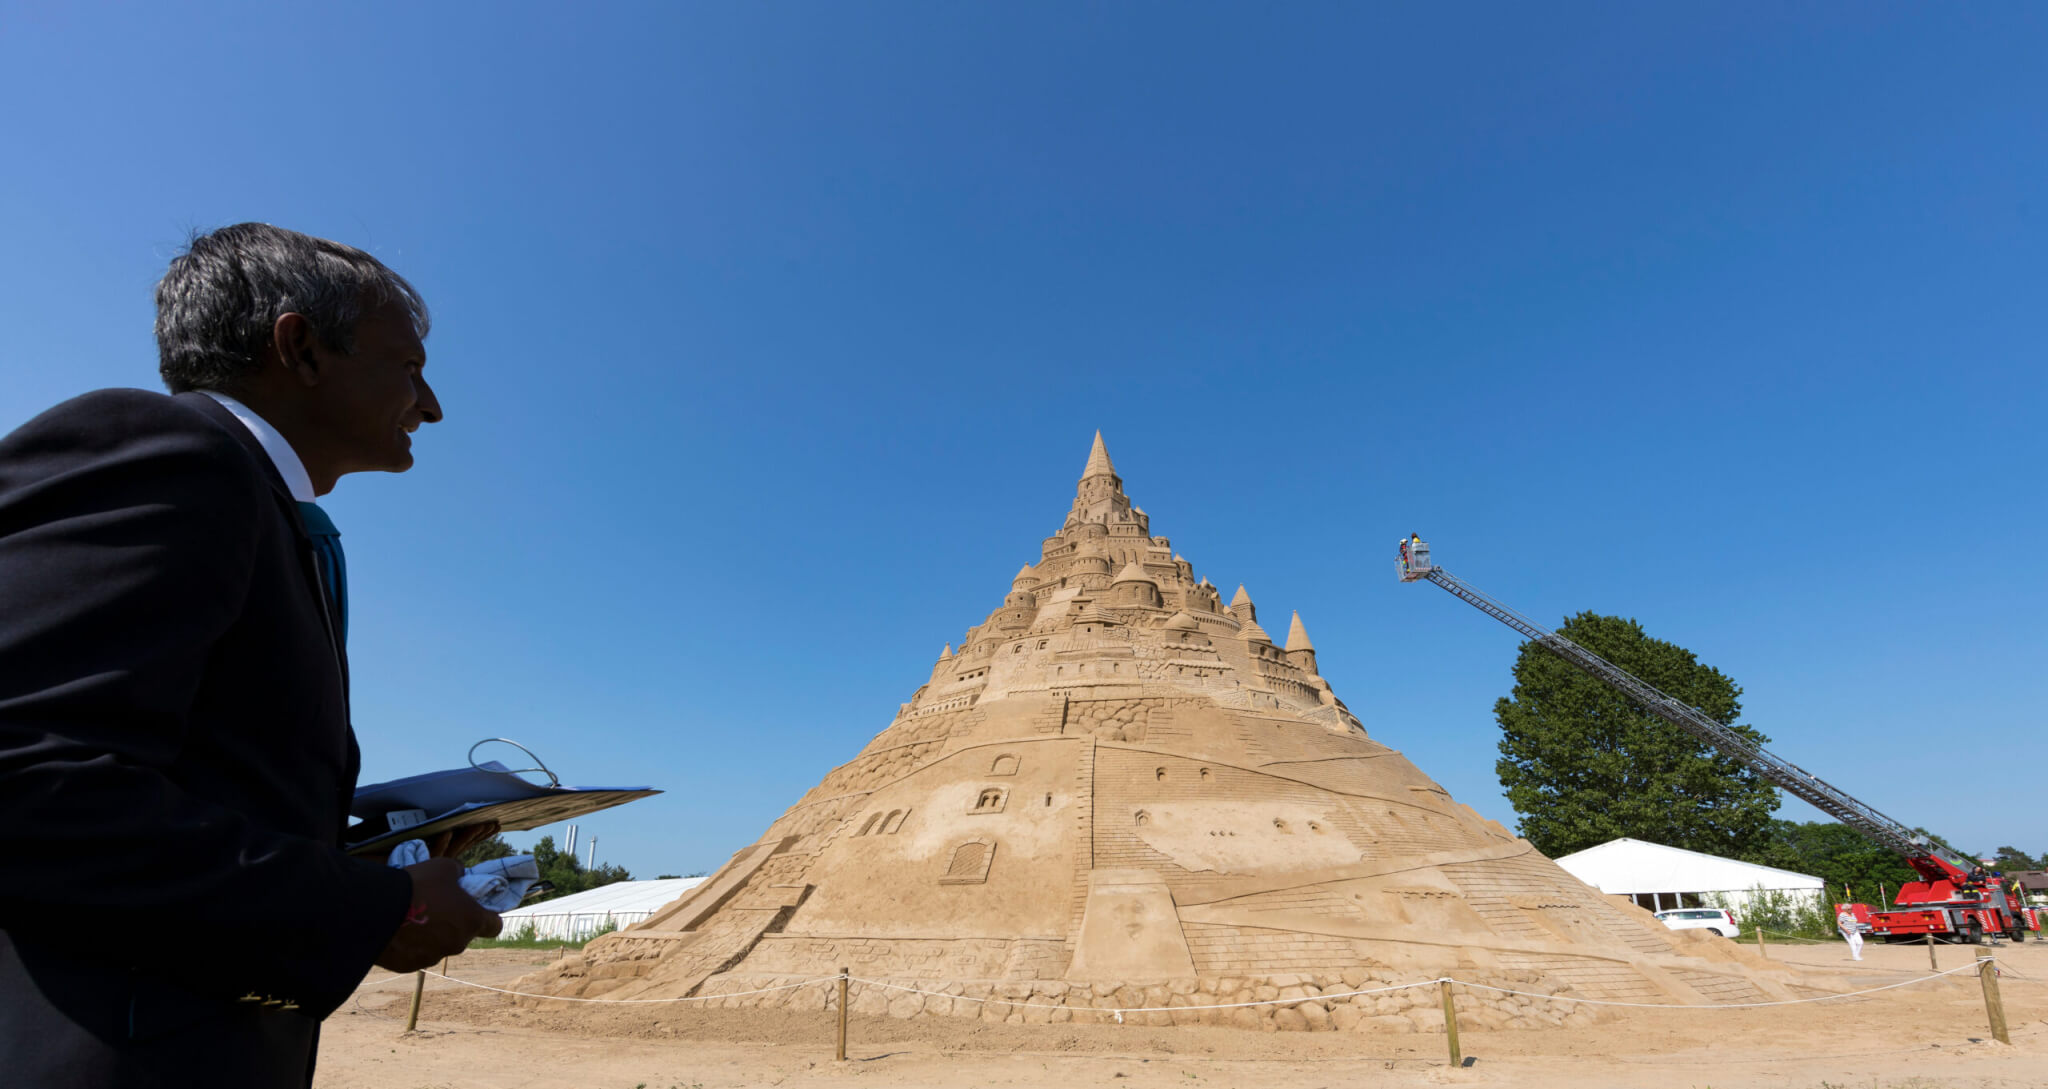 The British record judge Pravin Patel checks a sand castle at the Sand Sculpture Festival in Binz on the island of Ruegen, northern Germany, 05 June 2019. The sculpture is 17.66 meters high and consists of 11,000 tons of sand. The artwork received the 'Greatest Sandcastle in the World' award from Guinness World Records.